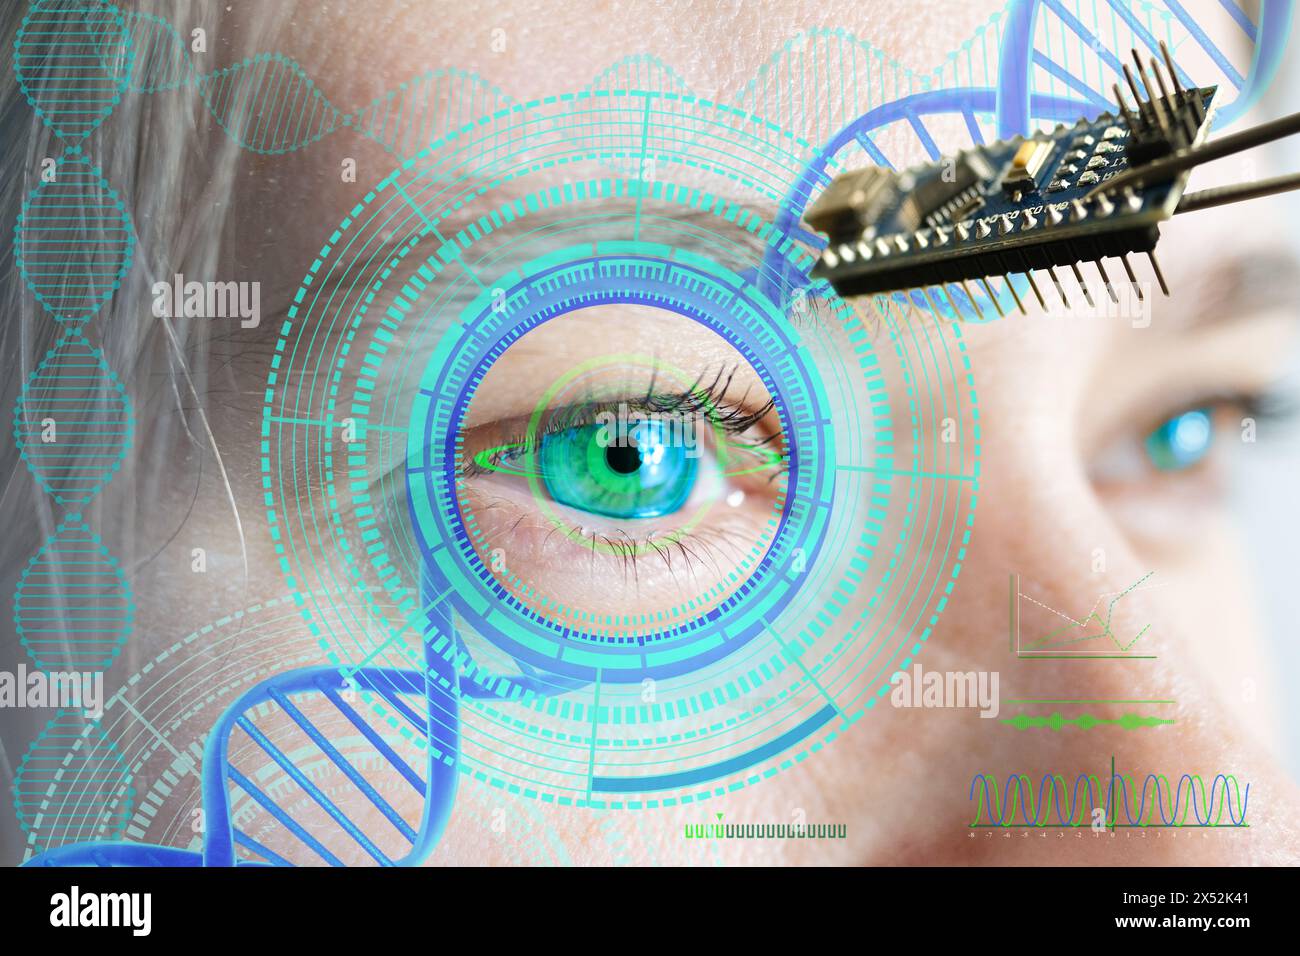 Installing electronic chip into human bionic, neuroprosthetic eye, cutting-edge technology, Visionary technological advancement, restore sight Stock Photo